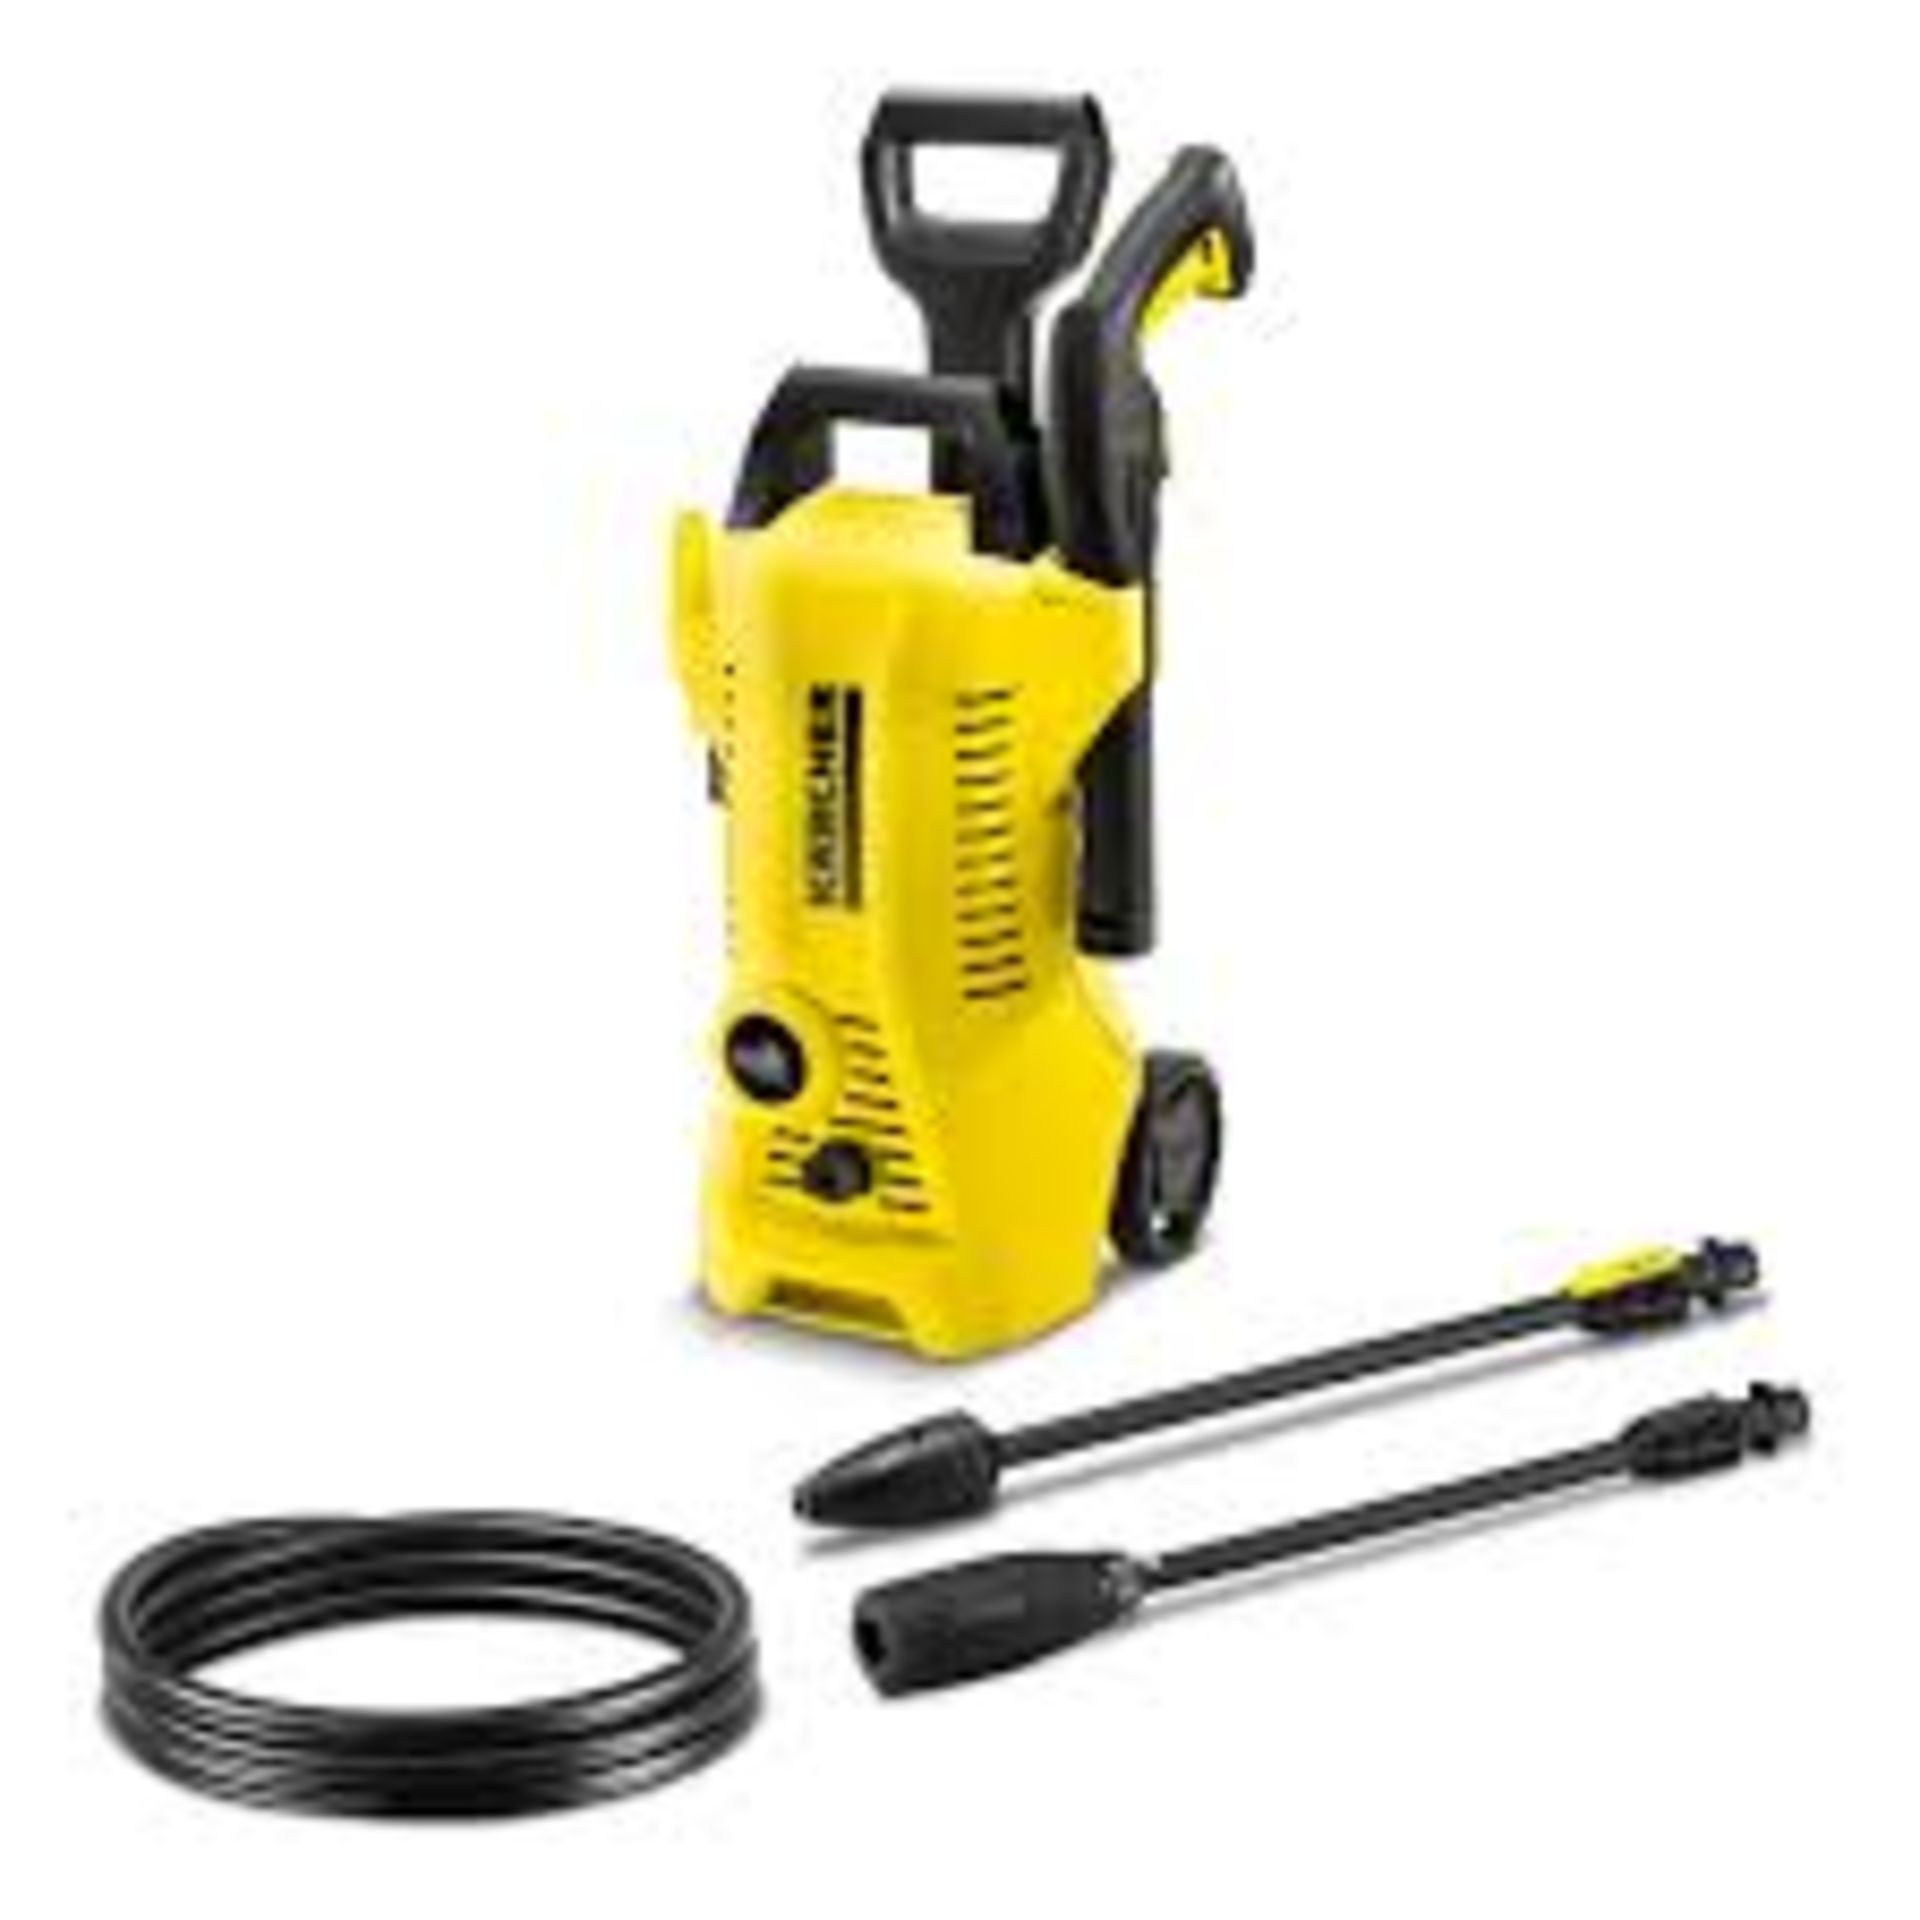 Karcher K2 Power Control Pressure Washer. - P2. The Kärcher K 2 Power Control Home pressure washer